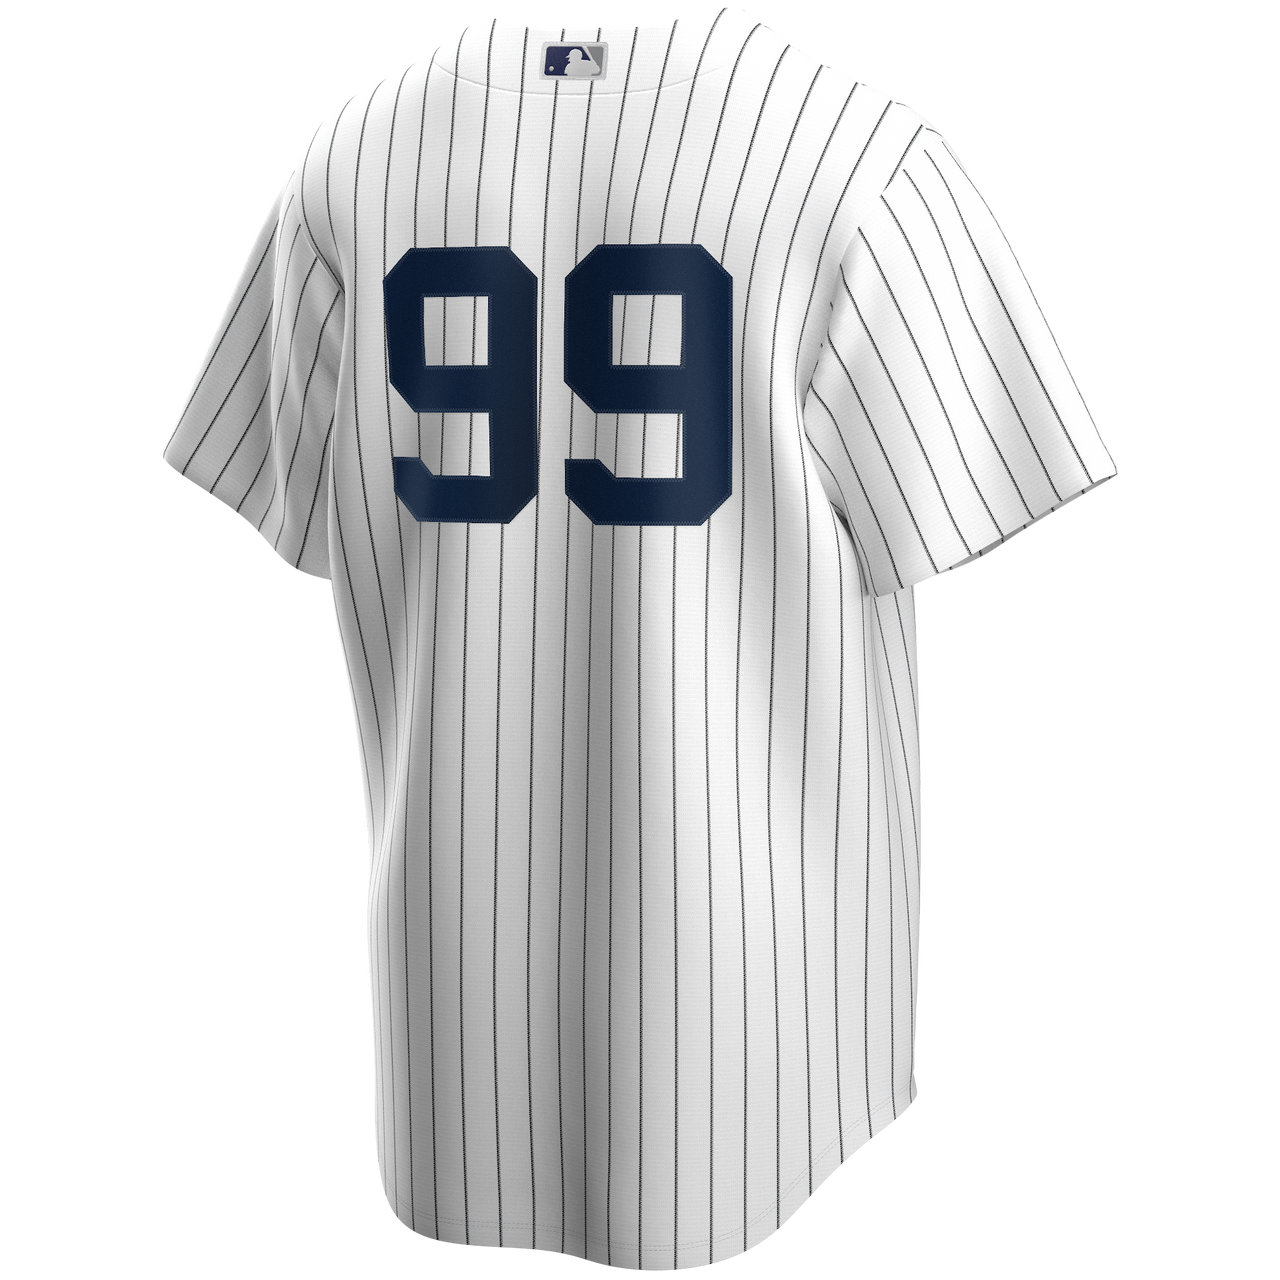 NEW YORK YANKEES MLB NIKE COOPERSTOWN FIELD OF DREAMS BASEBALL JERSEY SIZE  XL  eBay